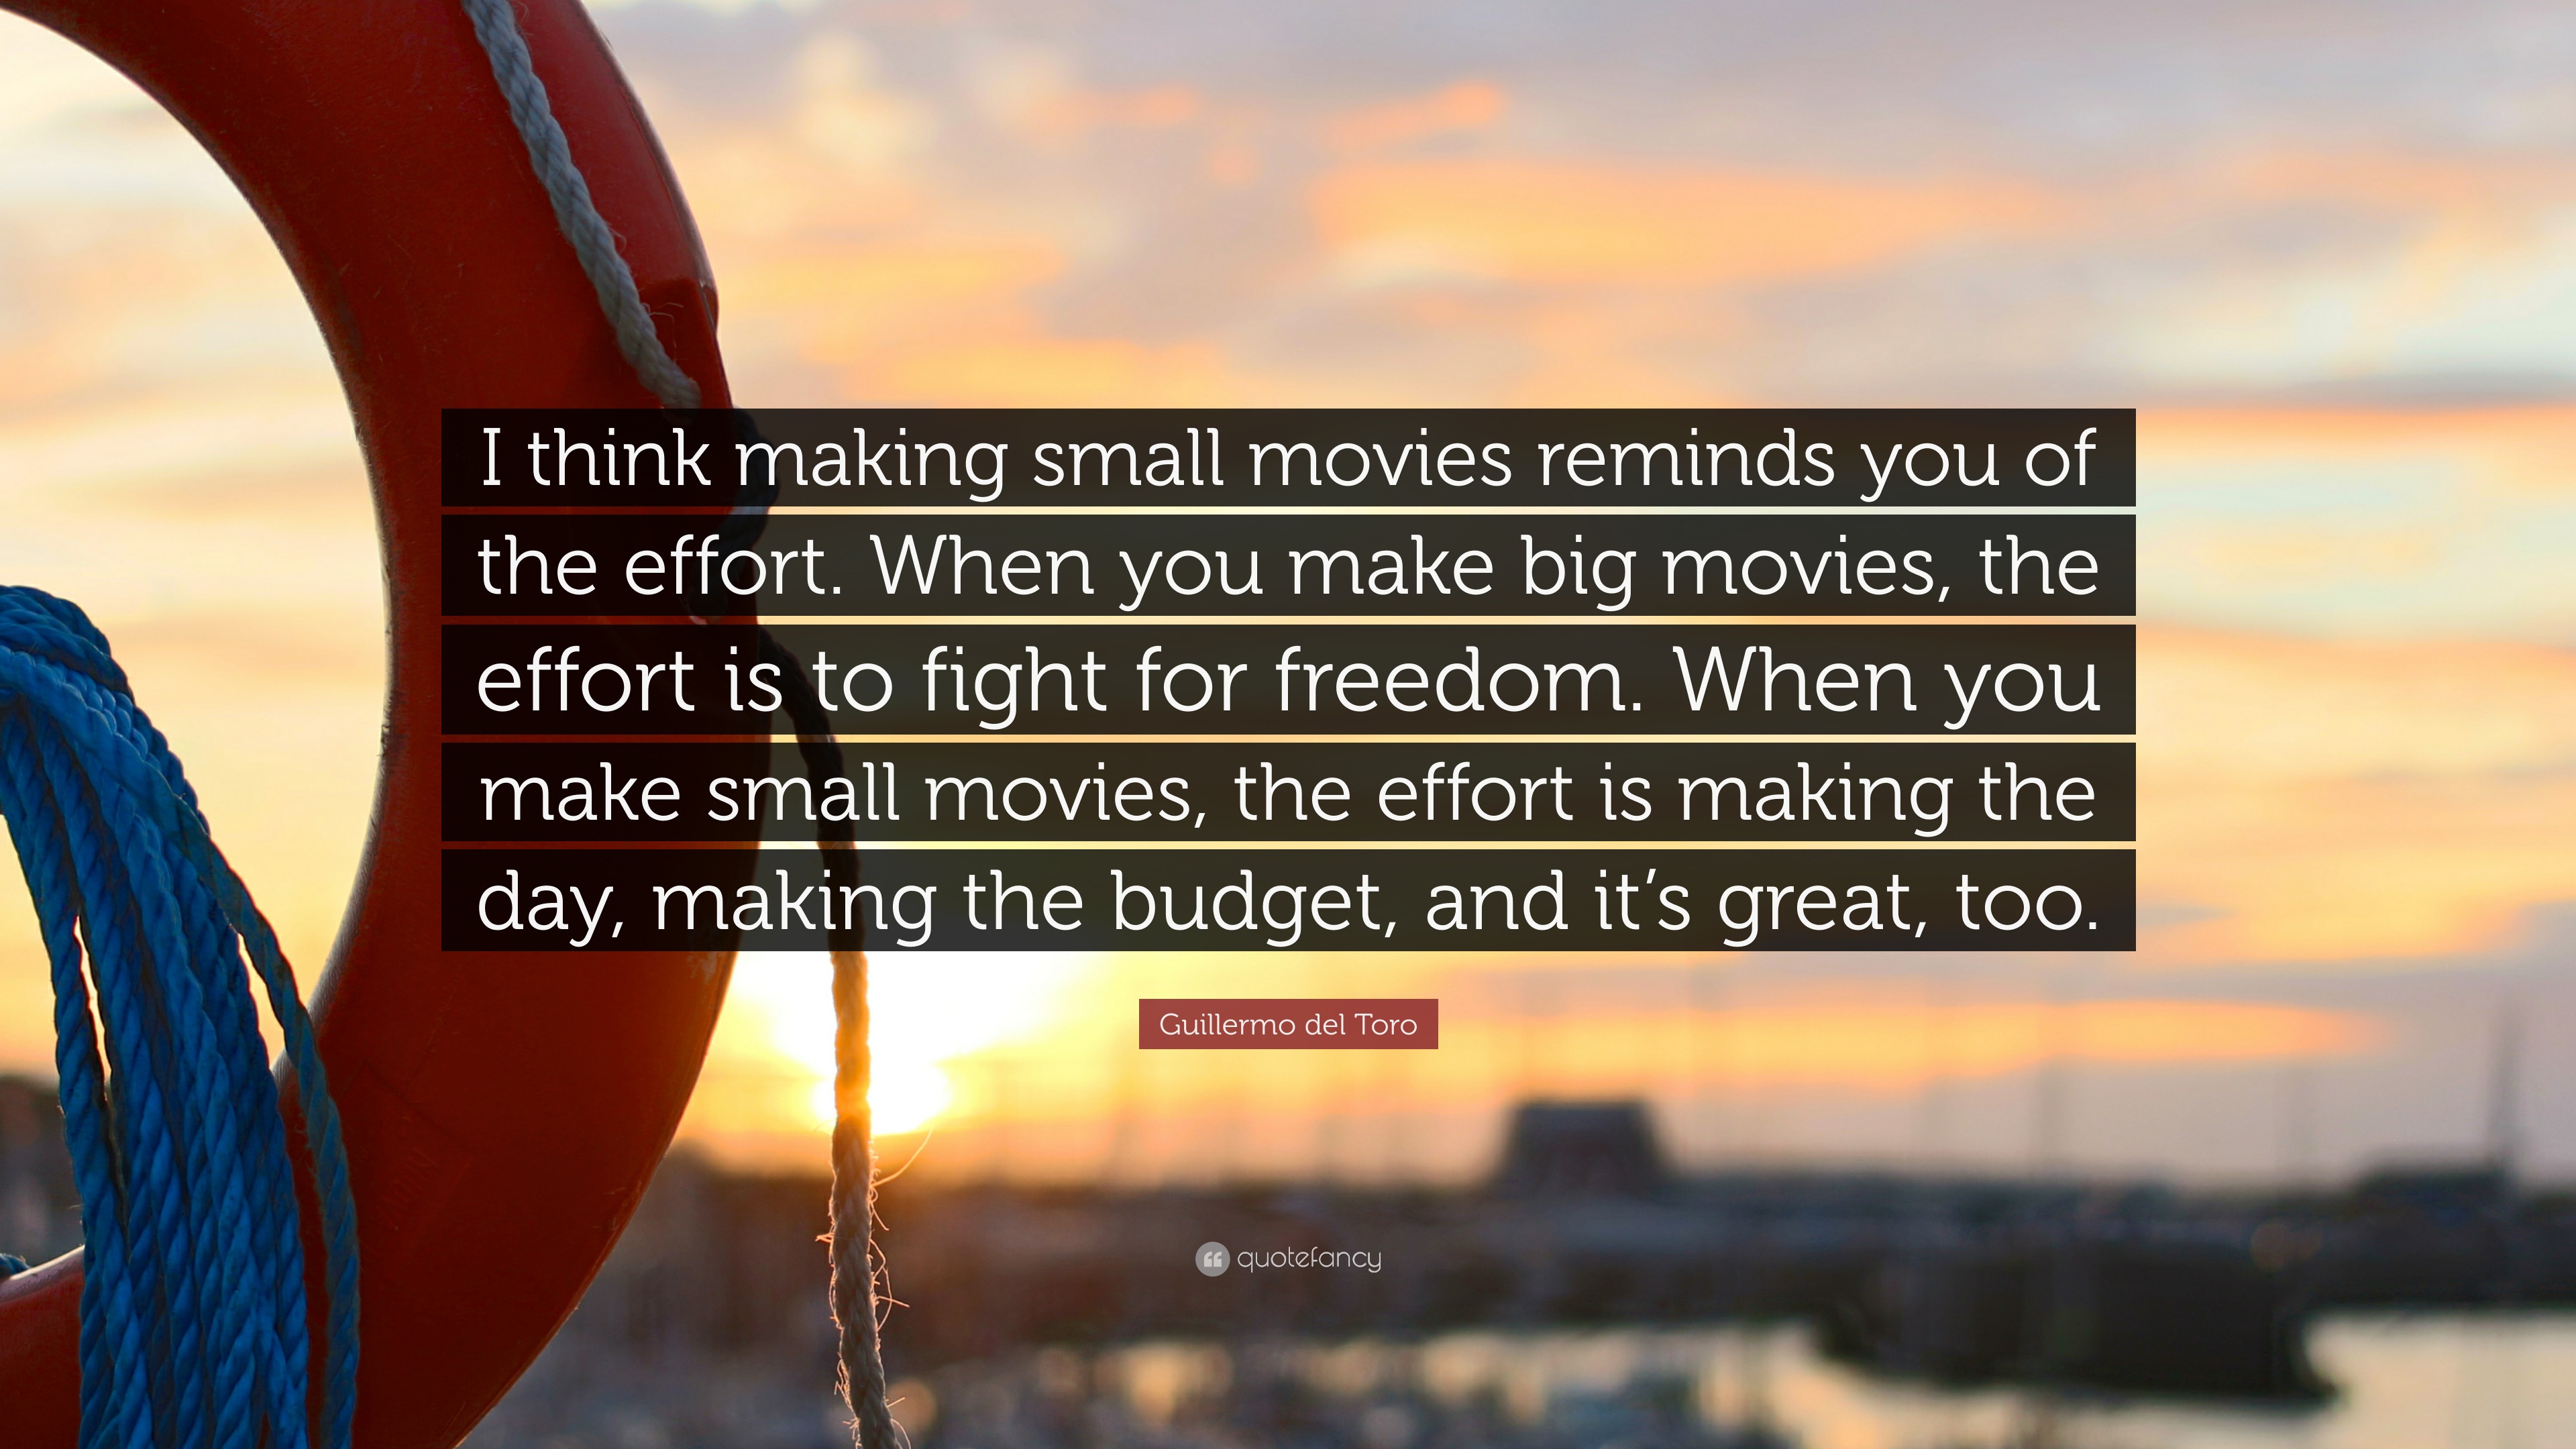 https://quotefancy.com/media/wallpaper/3840x2160/3832835-Guillermo-del-Toro-Quote-I-think-making-small-movies-reminds-you.jpg